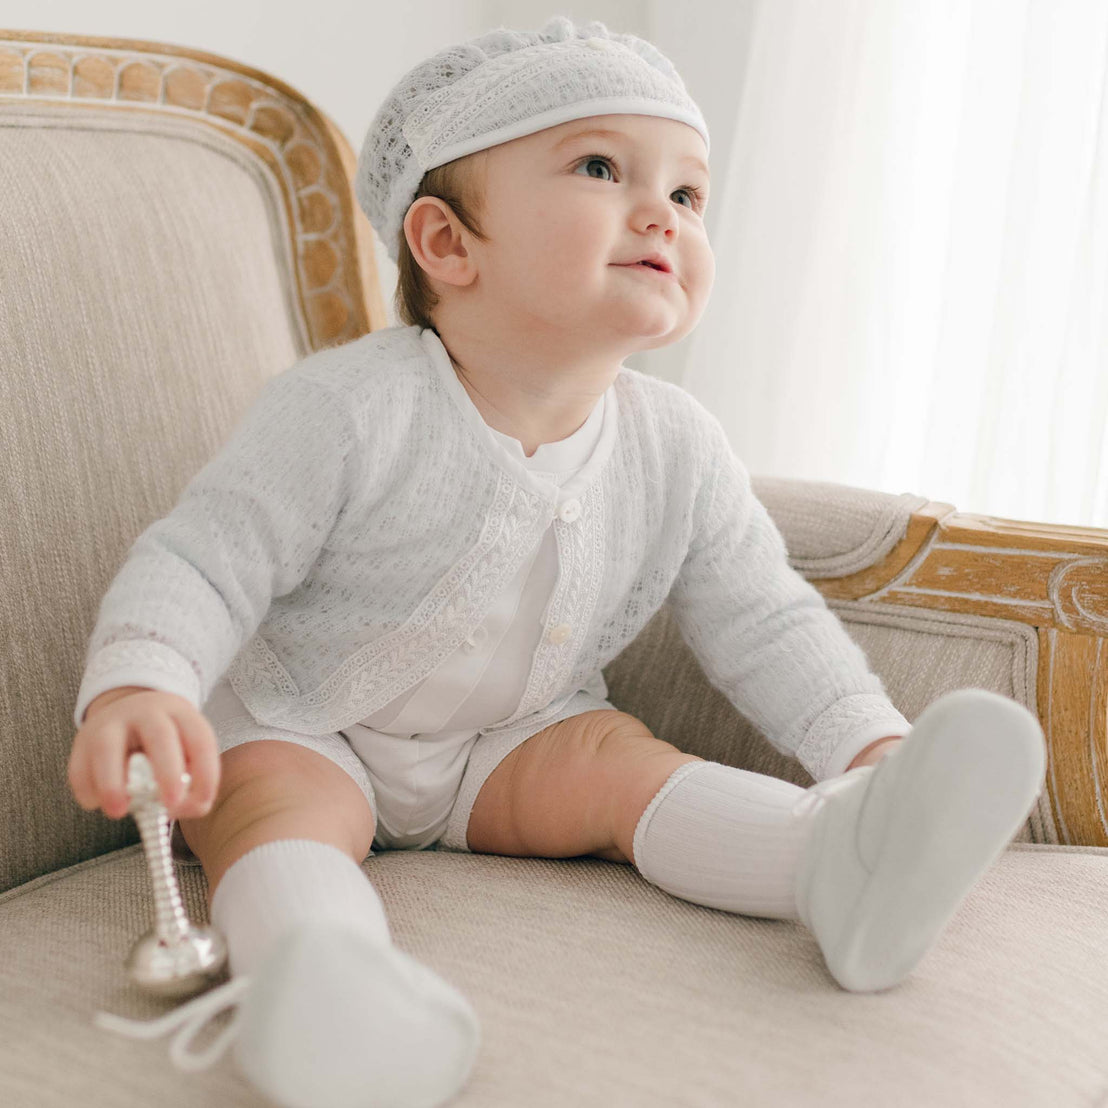 A joyful baby boy wearing the blue knit Oliver Sweater Shorts Suit sits on a beige sofa, holding a silver rattle, and looking up with a bright smile.